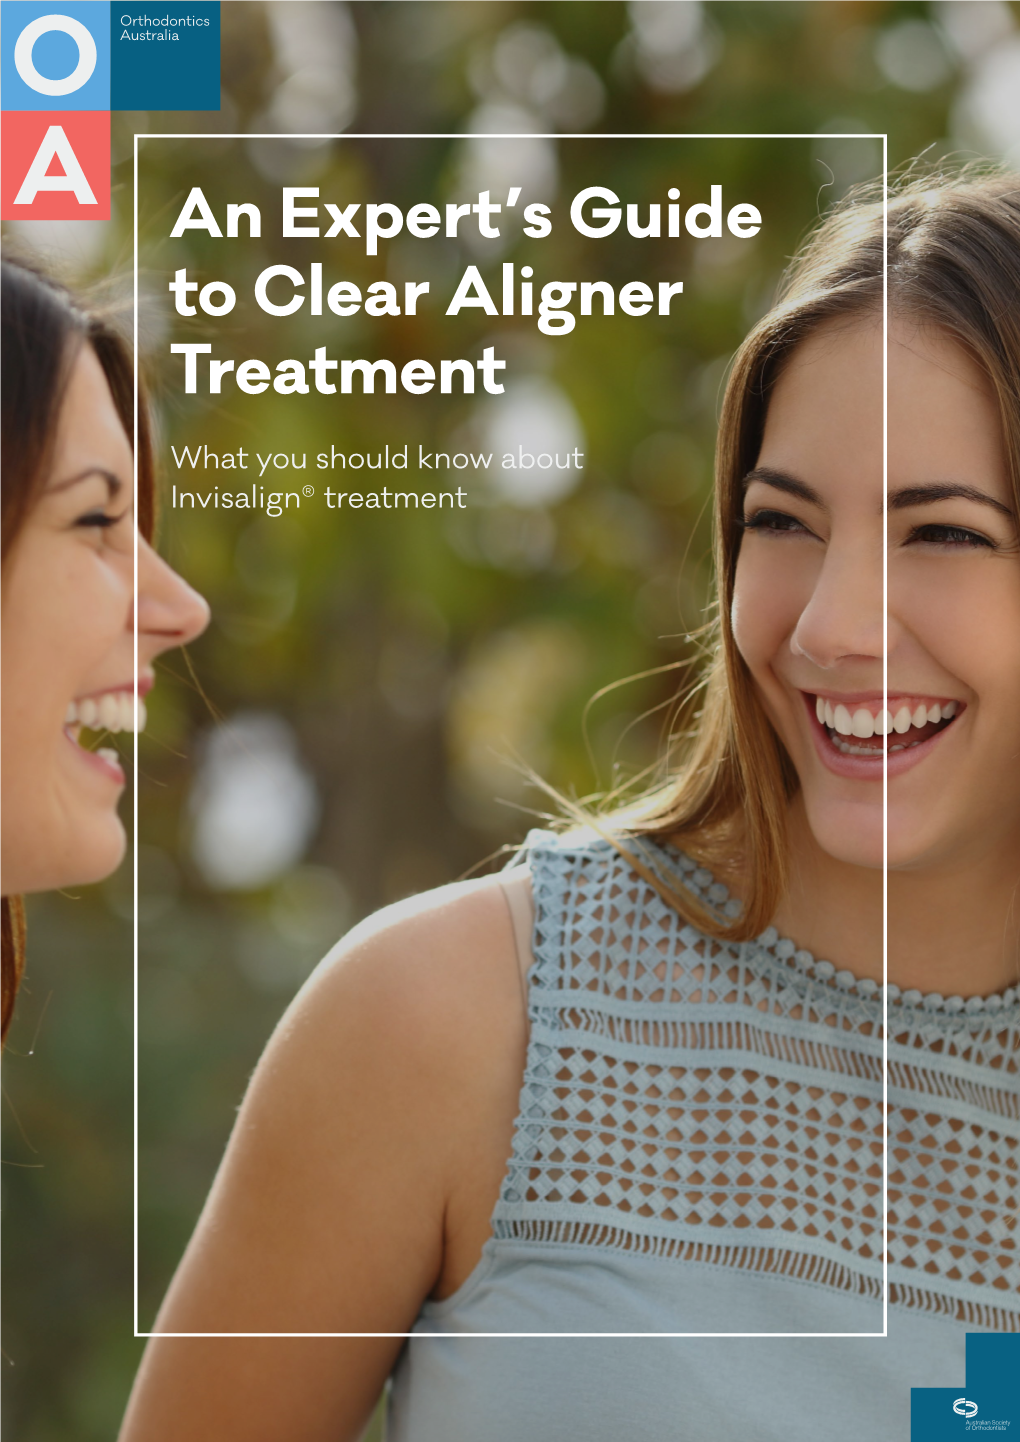 An Expert's Guide to Clear Aligner Treatment